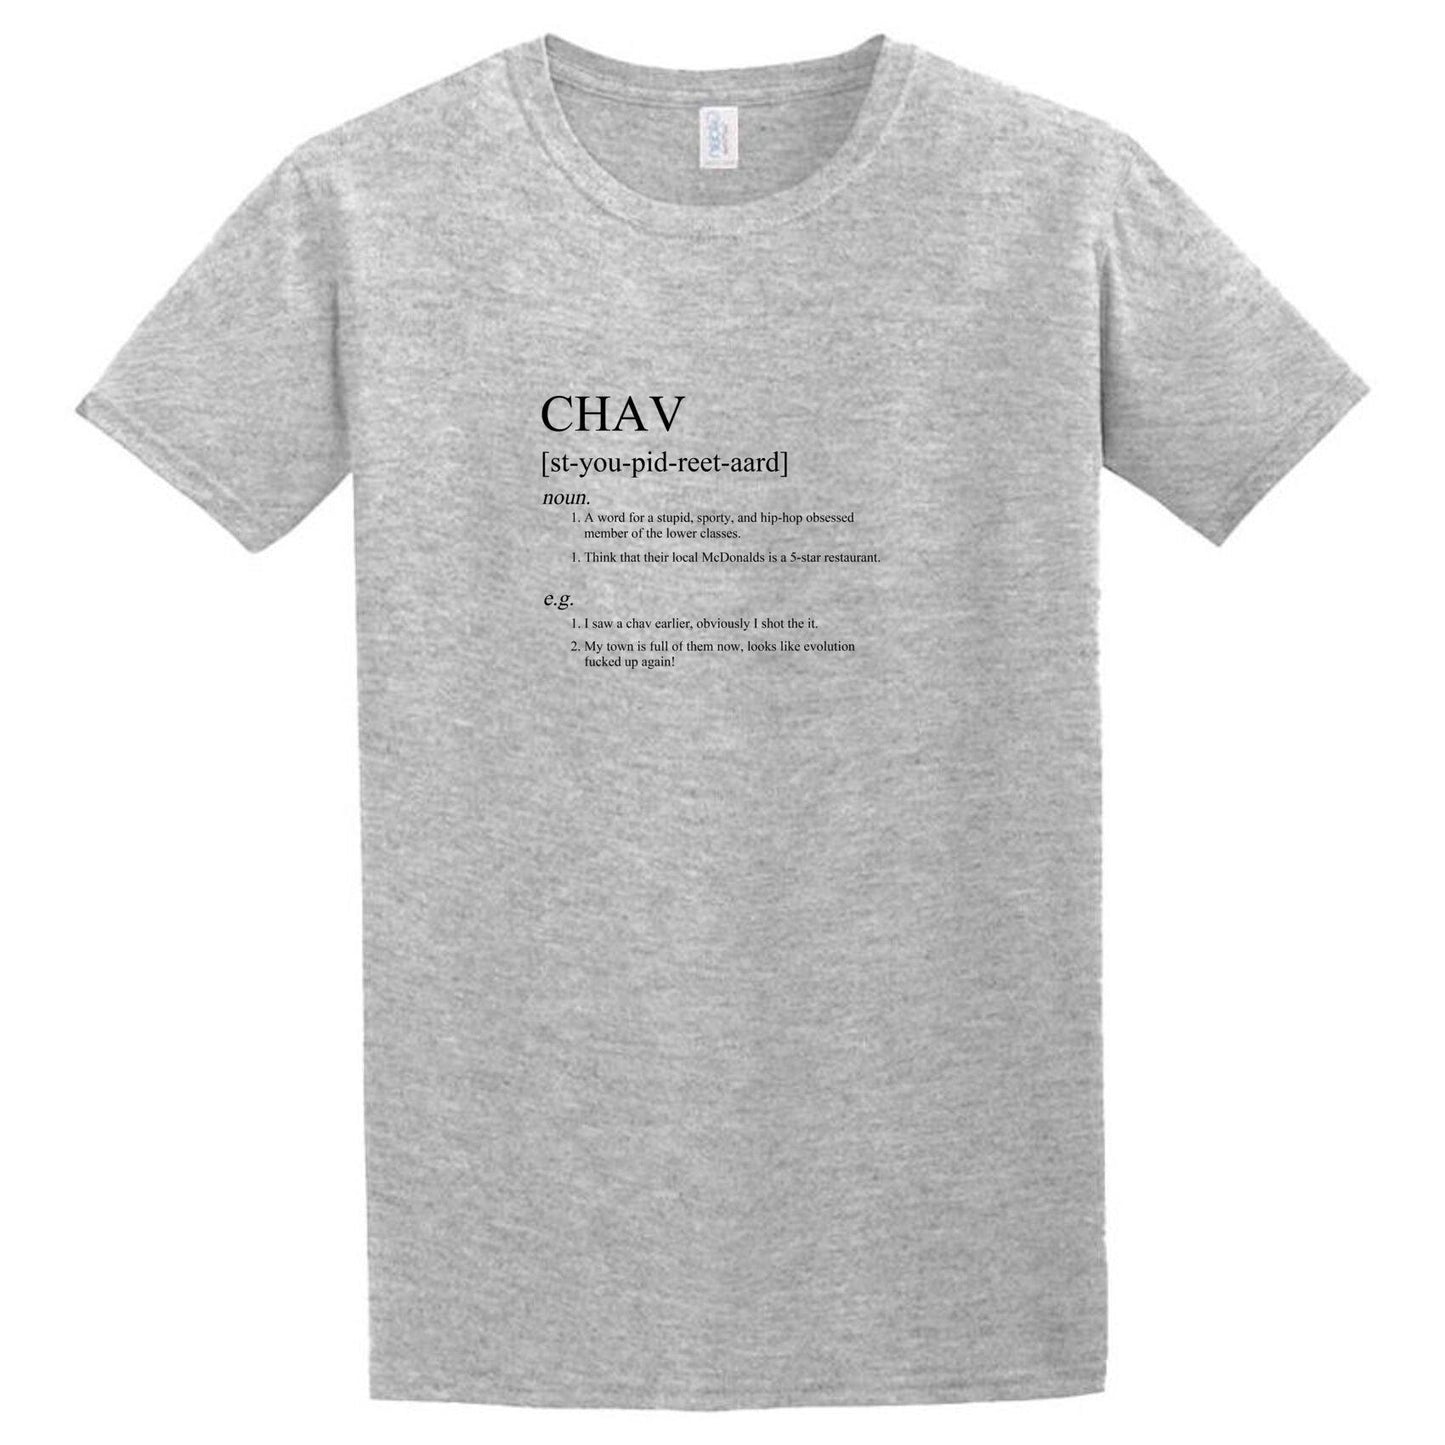 A Chav T-Shirt from Twisted Gifts that says CVAD.